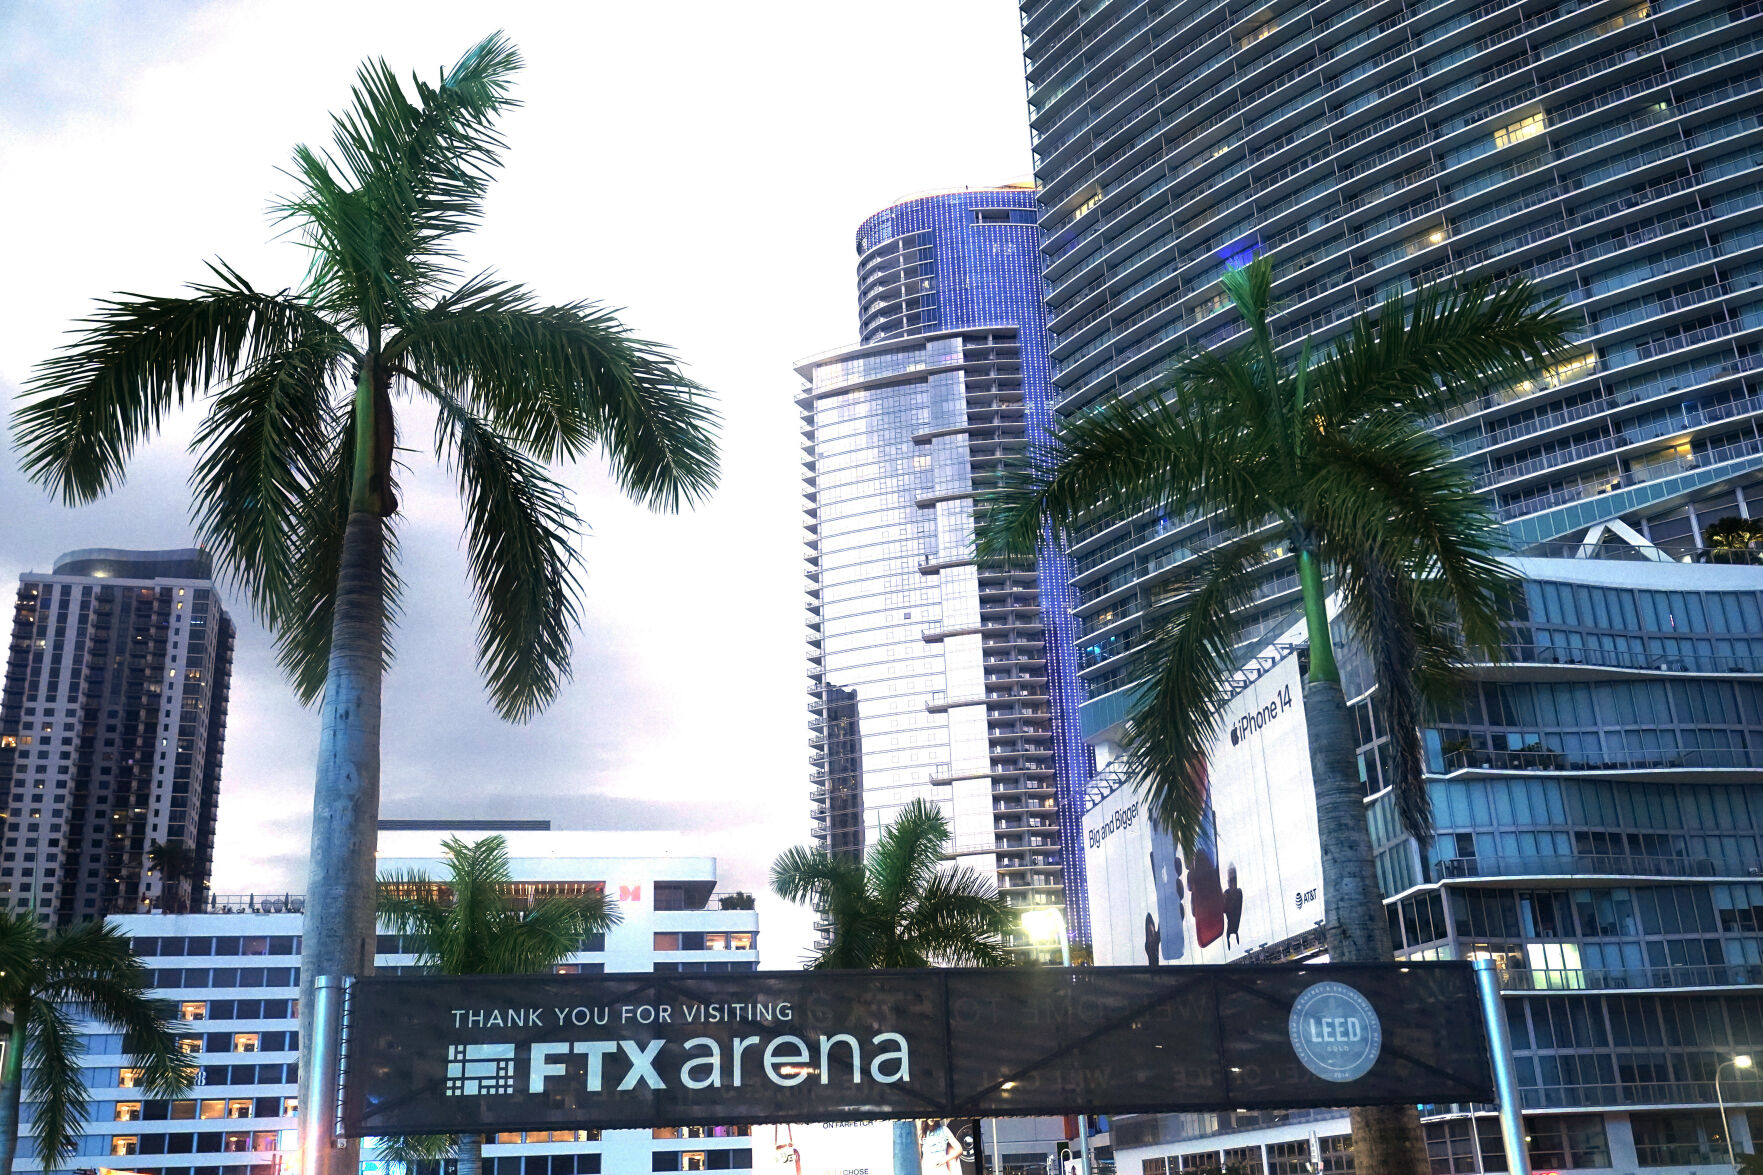 <p>Signage for the FTX Arena, where the Miami Heat basketball team plays, is visible Saturday, Nov. 12, 2022, in Miami. Sam Bankman-Fried received numerous plaudits as he rapidly achieved superstar status as the head of cryptocurrency exchange FTX: the savior of crypto, the newest force in Democratic politics and potentially the world’s first trillionaire. Now the comments about the 30-year-old aren’t so kind after FTX filed for bankruptcy protection Friday, Nov. 11 leaving his investors and customers feeling duped and many others in the crypto world fearing the repercussions. (AP Photo/Marta Lavandier)</p>   PHOTO CREDIT: Marta Lavandier - staff, AP